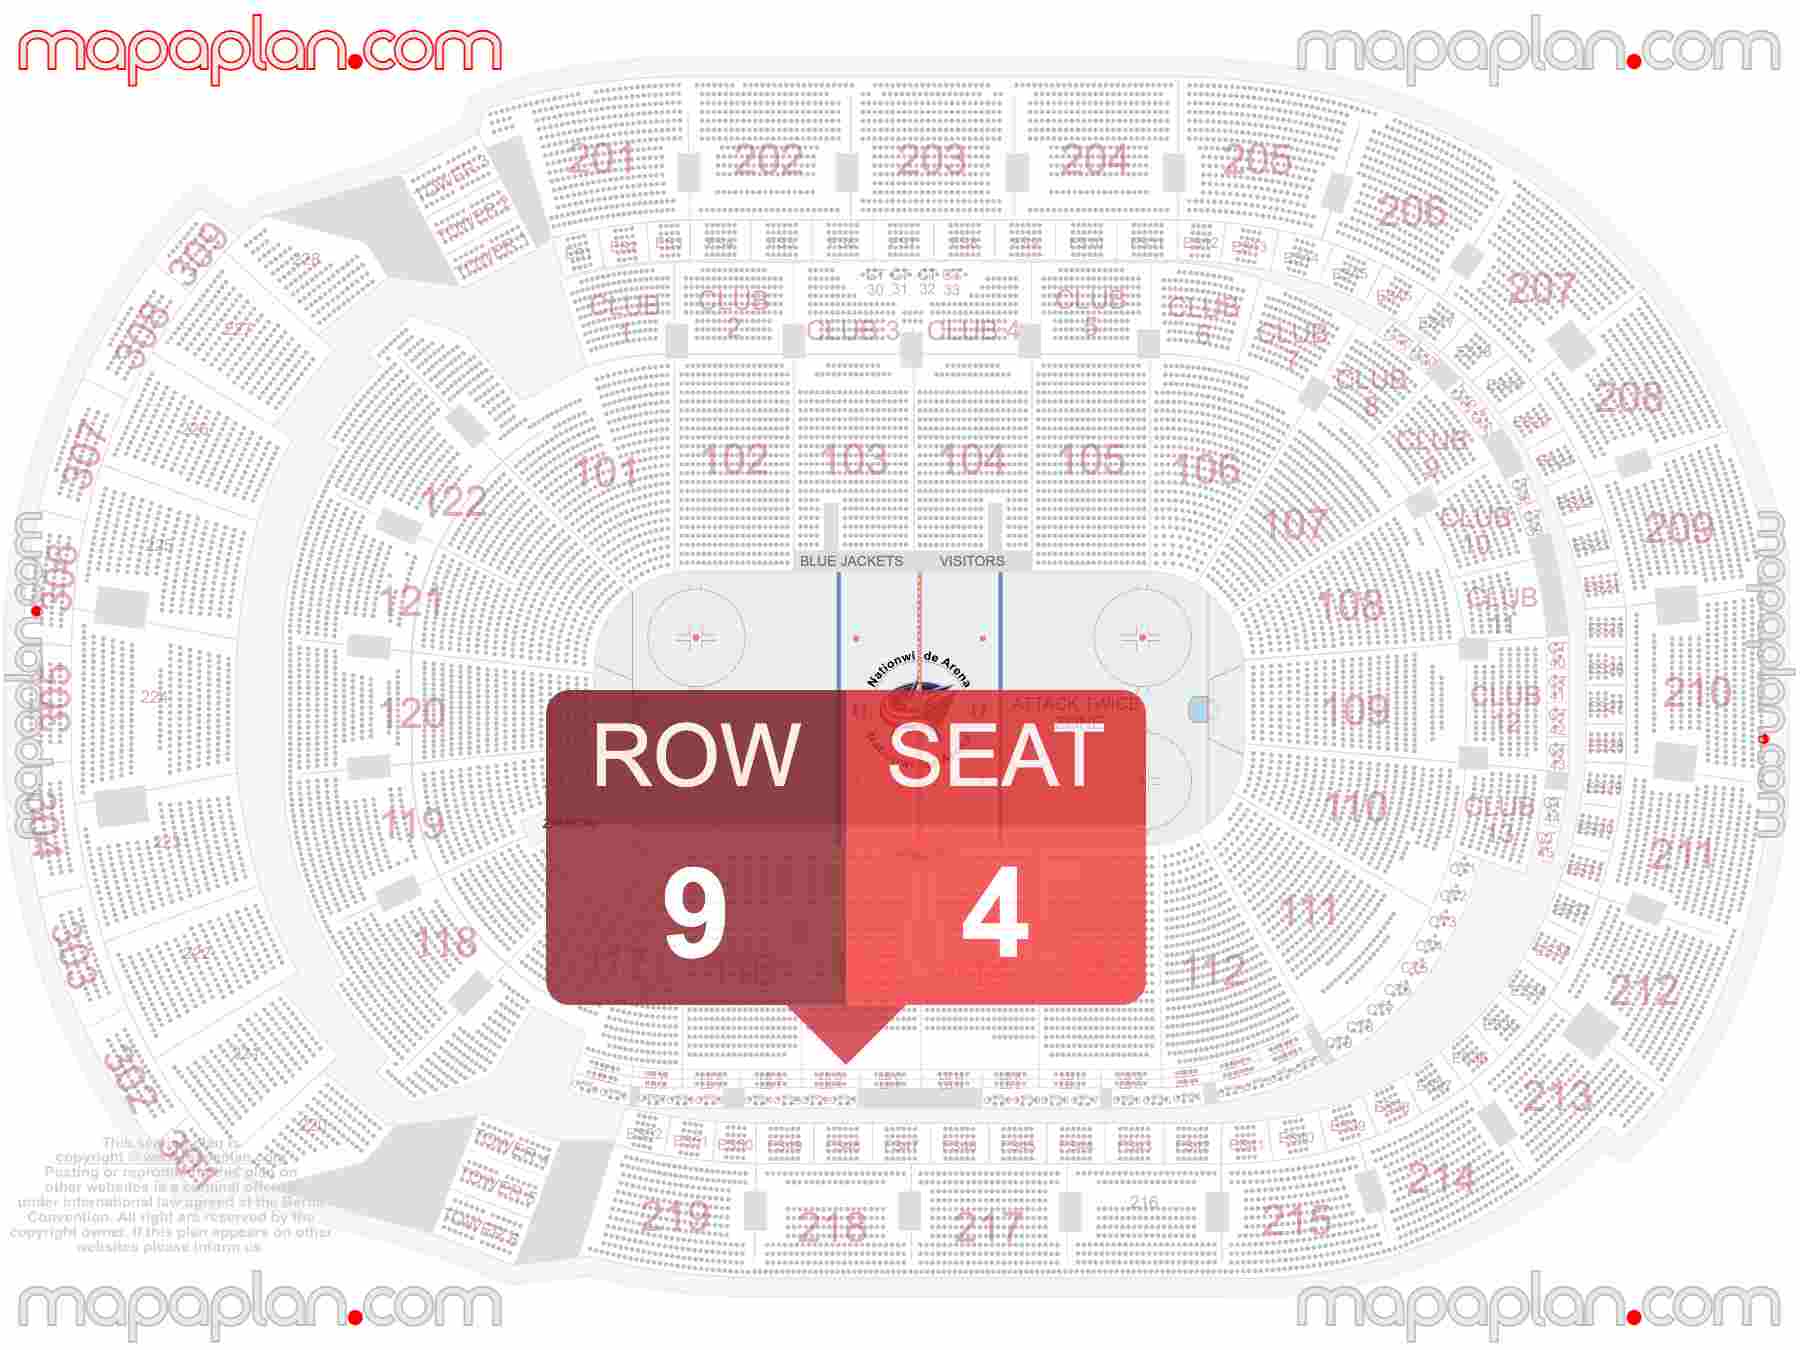 Columbus Nationwide Arena seating chart Columbus Blue Jackets hockey inside capacity view arrangement plan - Interactive virtual 3d best seats & rows detailed stadium image configuration layout